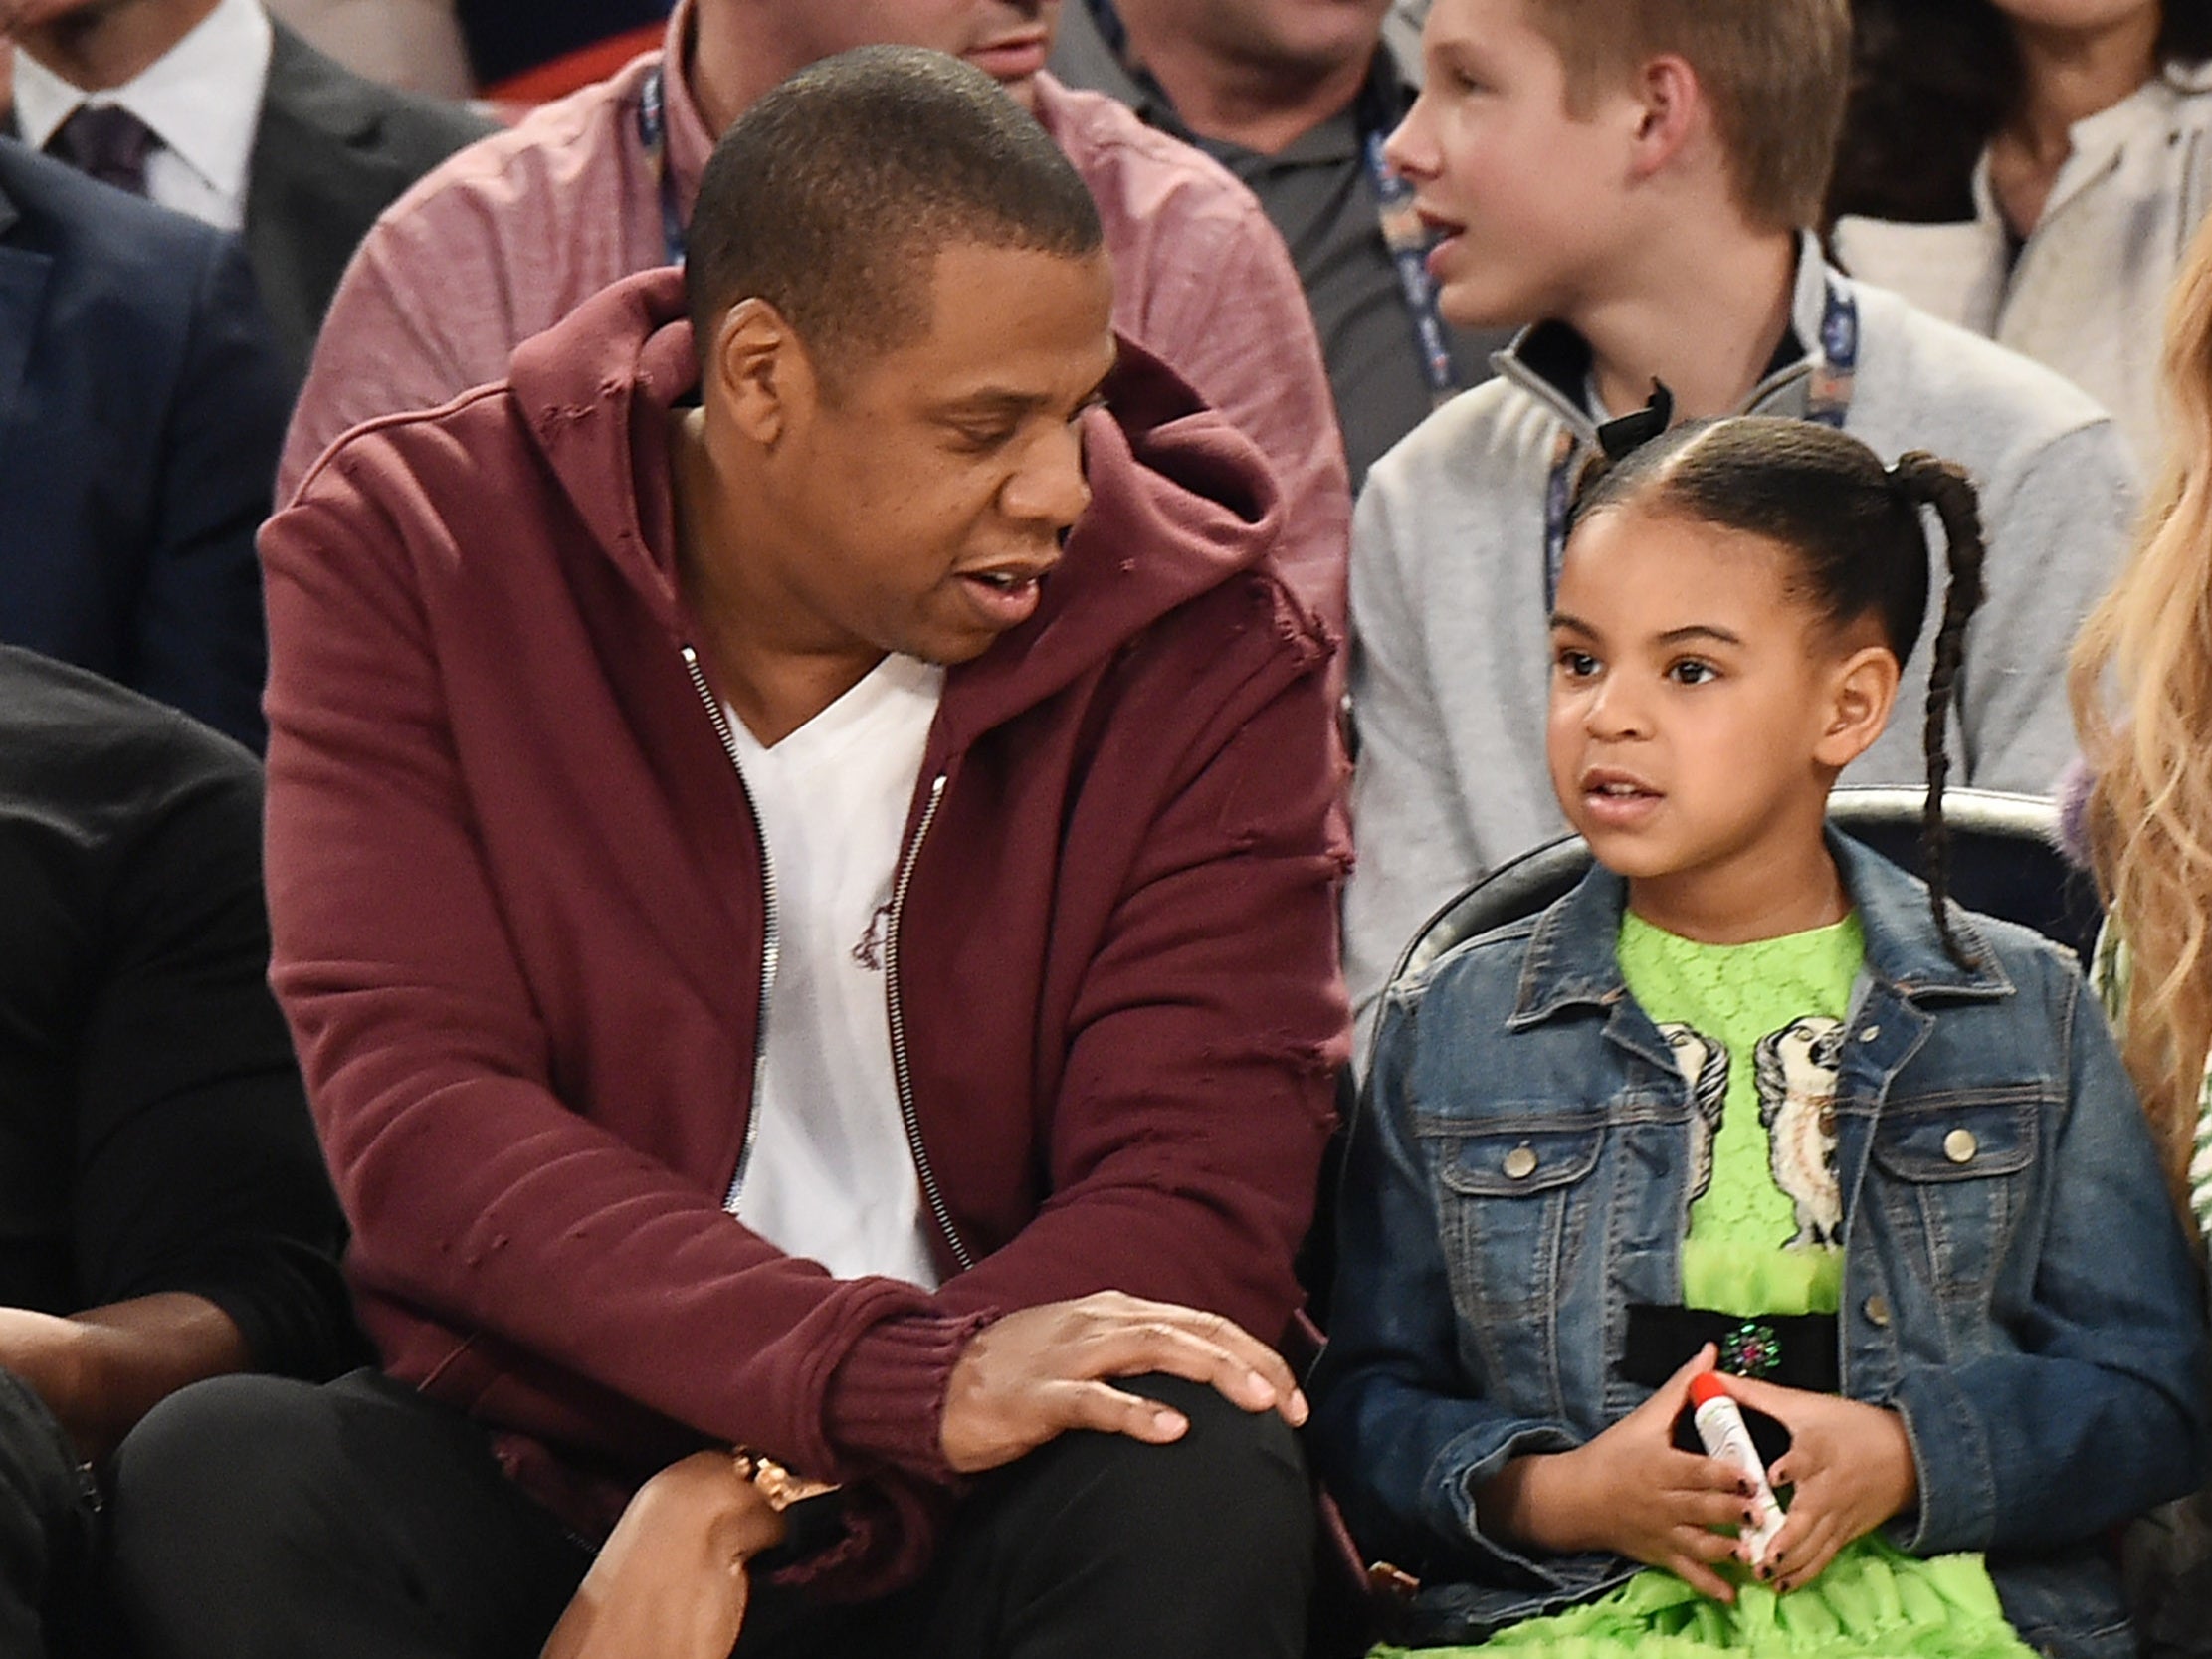 Jay-Z reveals how daughter Blue Ivy inspired him to learn how to swim